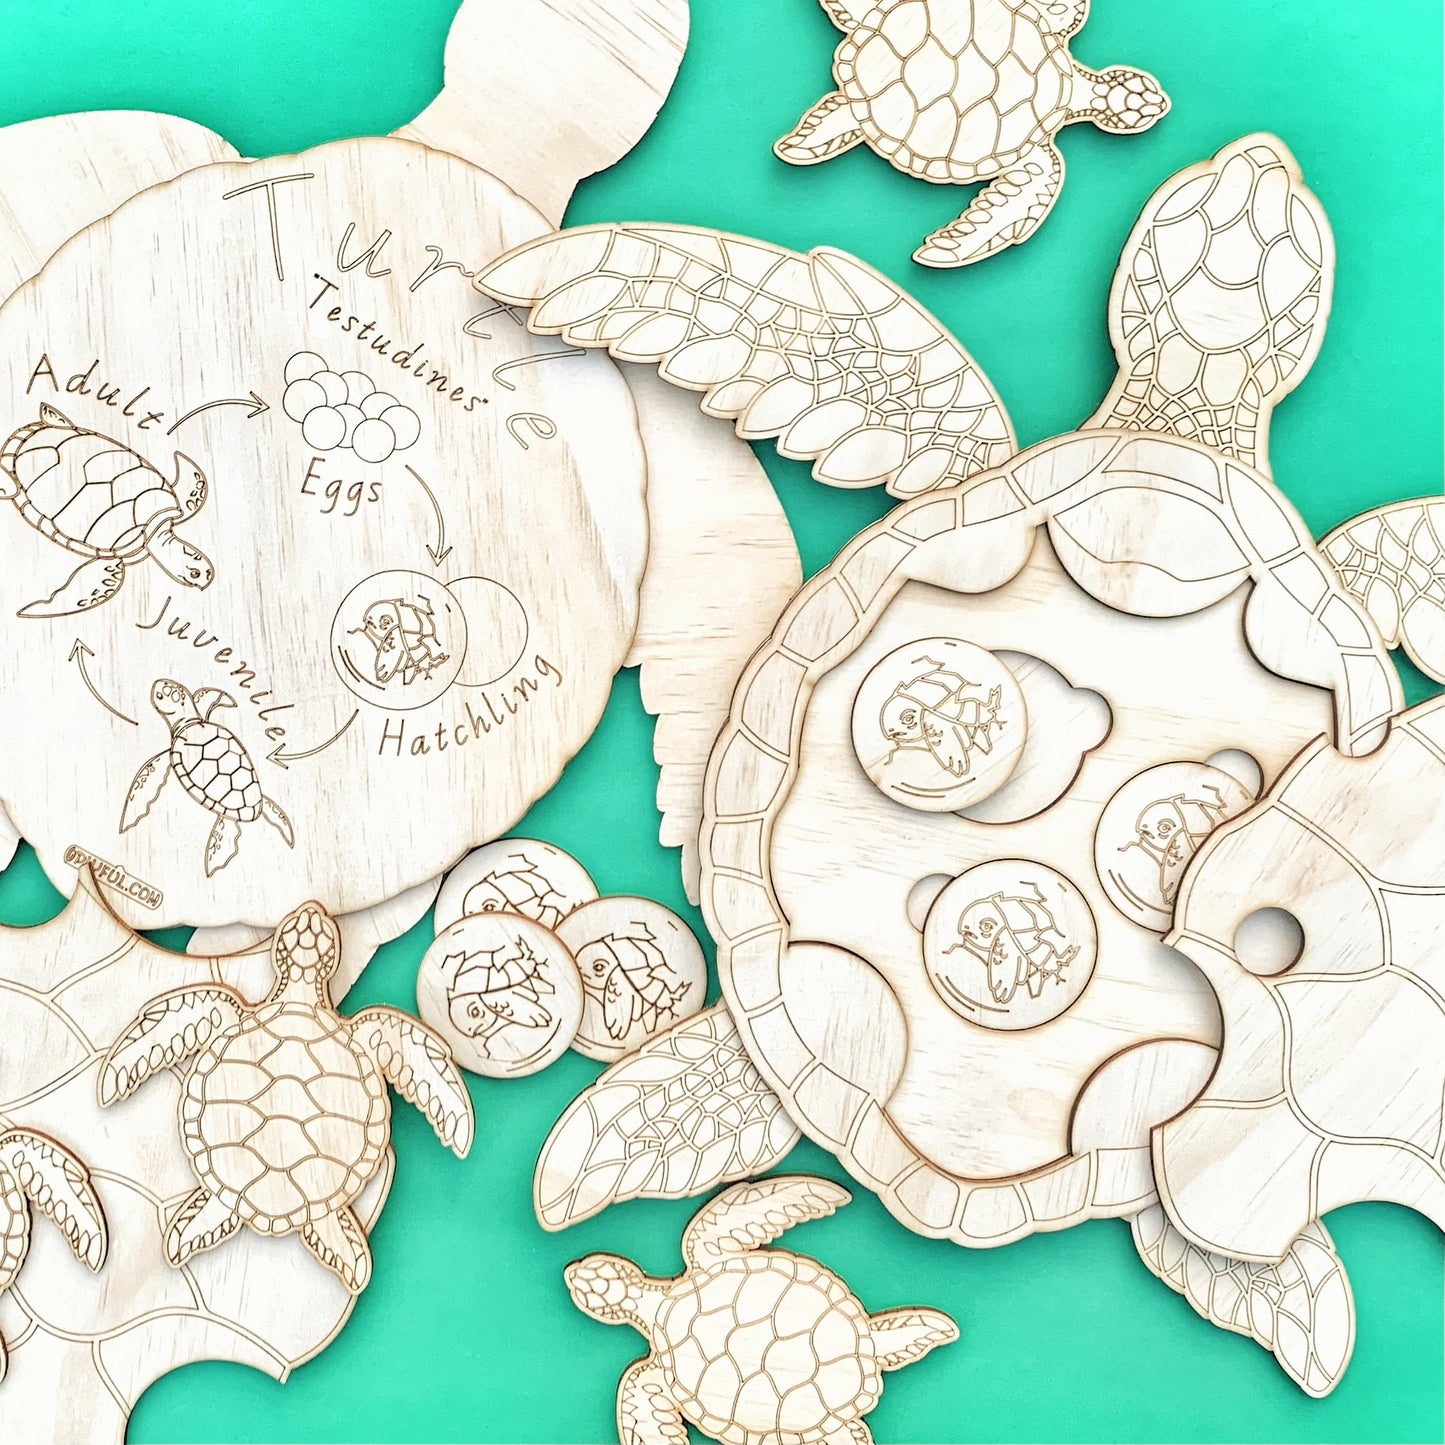 The Turtle - An Interactive Wooden Turtle Life Cycle Set